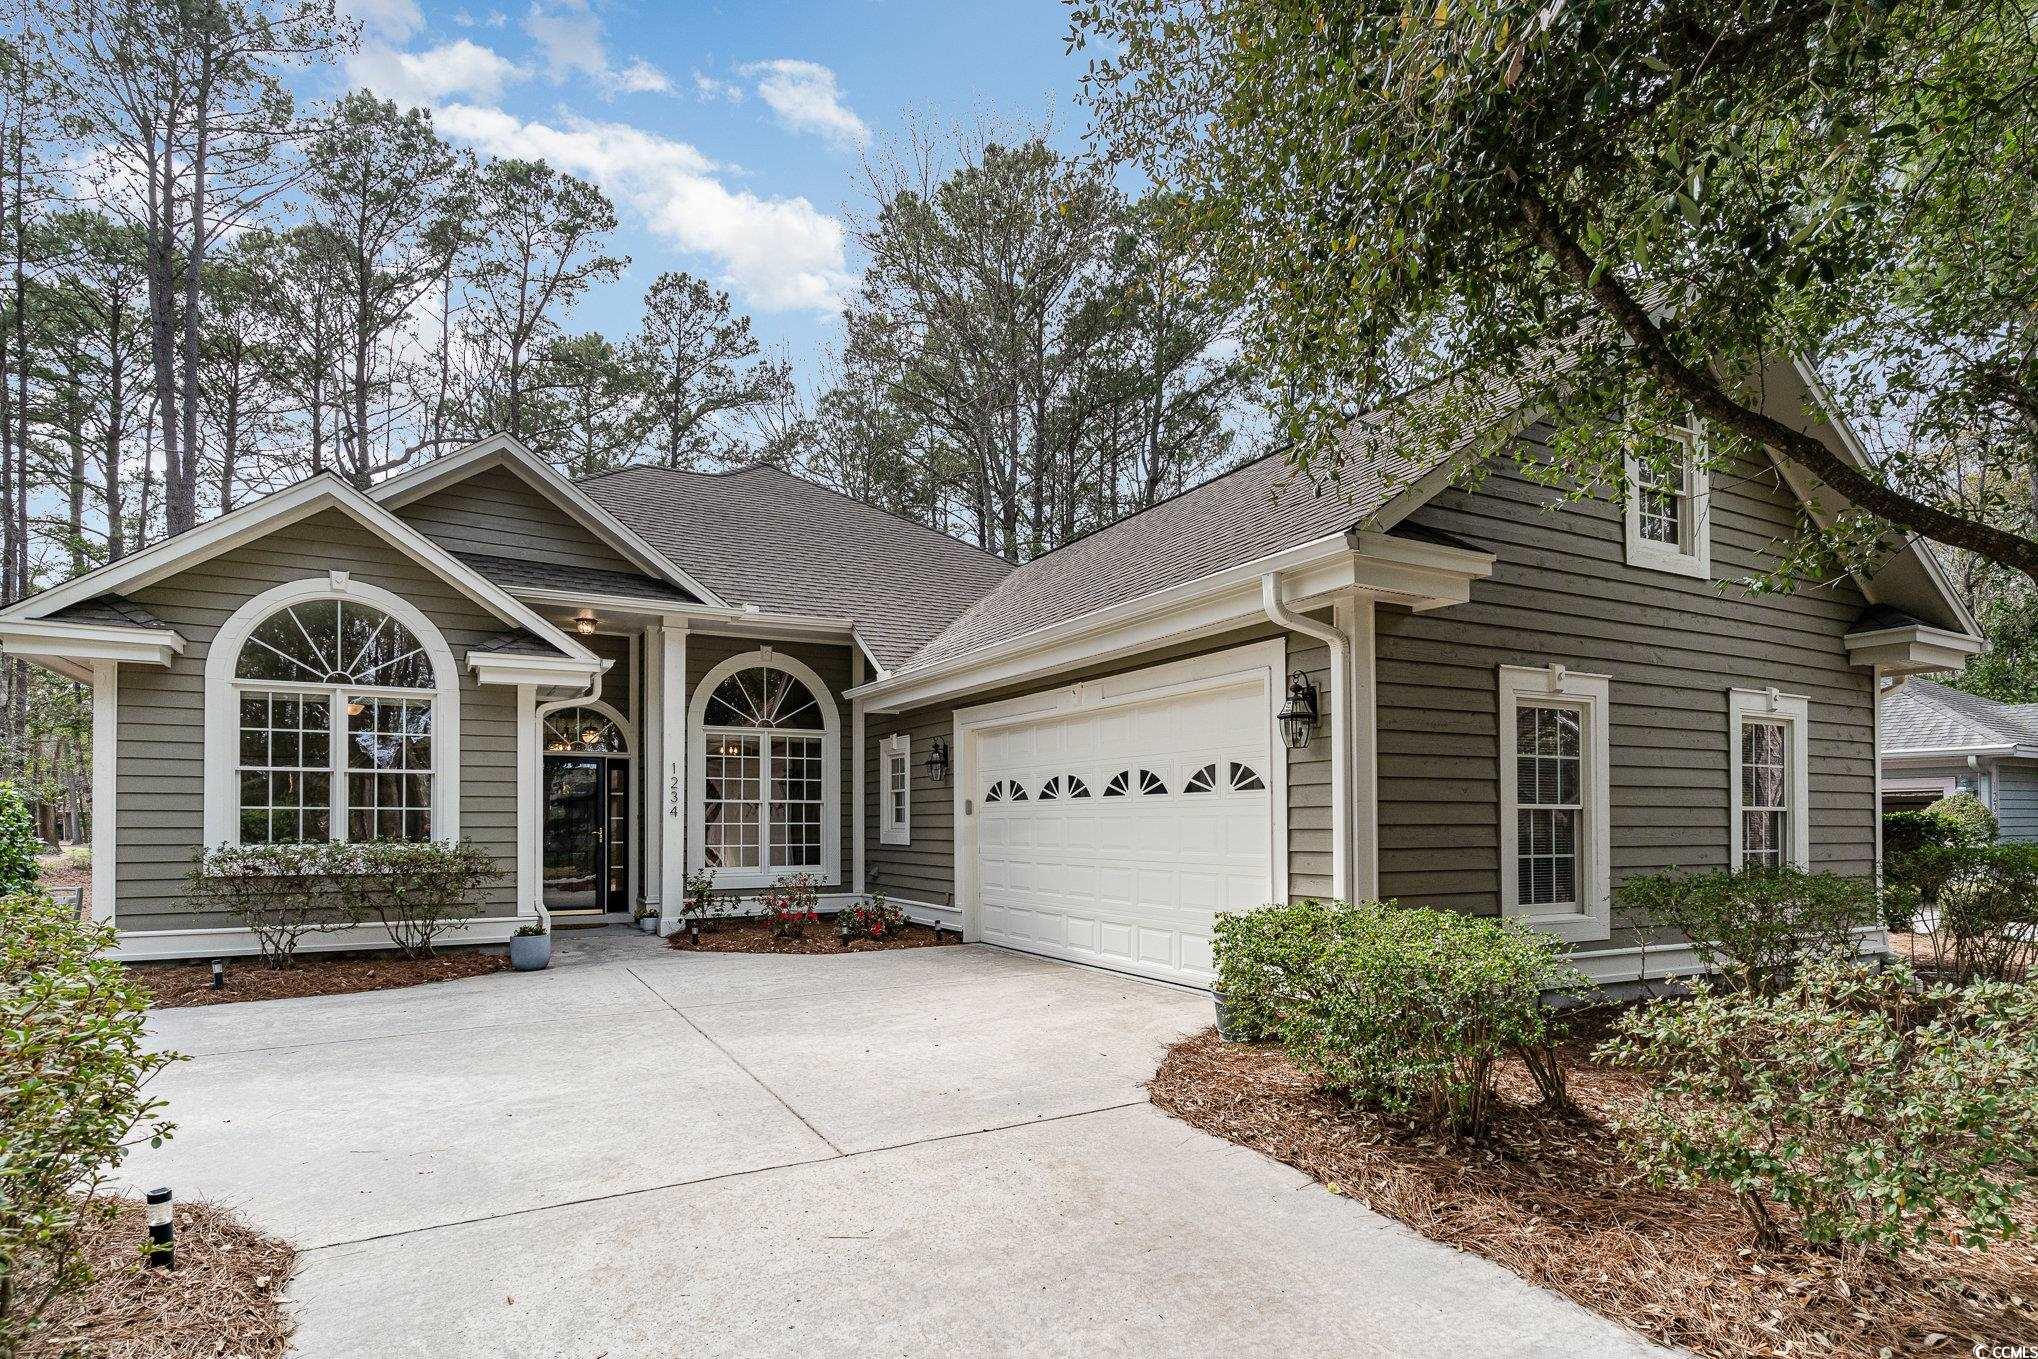 welcome to 1234 clipper rd in the prestigious tidewater plantation in north myrtle beach! this completely remodeled ranch-style home with 3 bedrooms and 2 bathrooms, welcomes an oversized lot for privacy that backs up to the famous tidewater plantation golf course, offering stunning views of the 15th fairway!! the interior and exterior have been beautifully remodeled, freshly painted and gutters on the exterior, while stepping inside offering lvp flooring throughout and new carpet in the bedrooms. you'll love the elegant touches like the 7-inch baseboards and the formal dining room that flows into not one, but two spacious living rooms filled with lots natural light. but let's talk about the kitchen - it's a chef's dream! with quartz countertops, a thor 6 burner dual-fuel range, luxury cabinets, and under cabinet lighting. it has everything you could ever want. plus, there's plenty of countertop and cabinet space for all your cooking needs. the primary suite is a true retreat, with an extended office sitting area, custom doors on the his/her closets, and a dream of a master bathroom with brand new vanities, a tiled shower with all the bells and whistles, and lvp flooring. and let's not forget about the amenities in tidewater plantation - it's an award-winning golf course community with a 24/7 gated entrance, clubhouse, 2 pools, golf shop, fitness center, tennis and pickleball courts, and even an oceanfront cabana for your summer needs. short distance to cherry grove beach, main street, shops, hospitals, restaurants, shopping and all north myrtle beach has to offer.